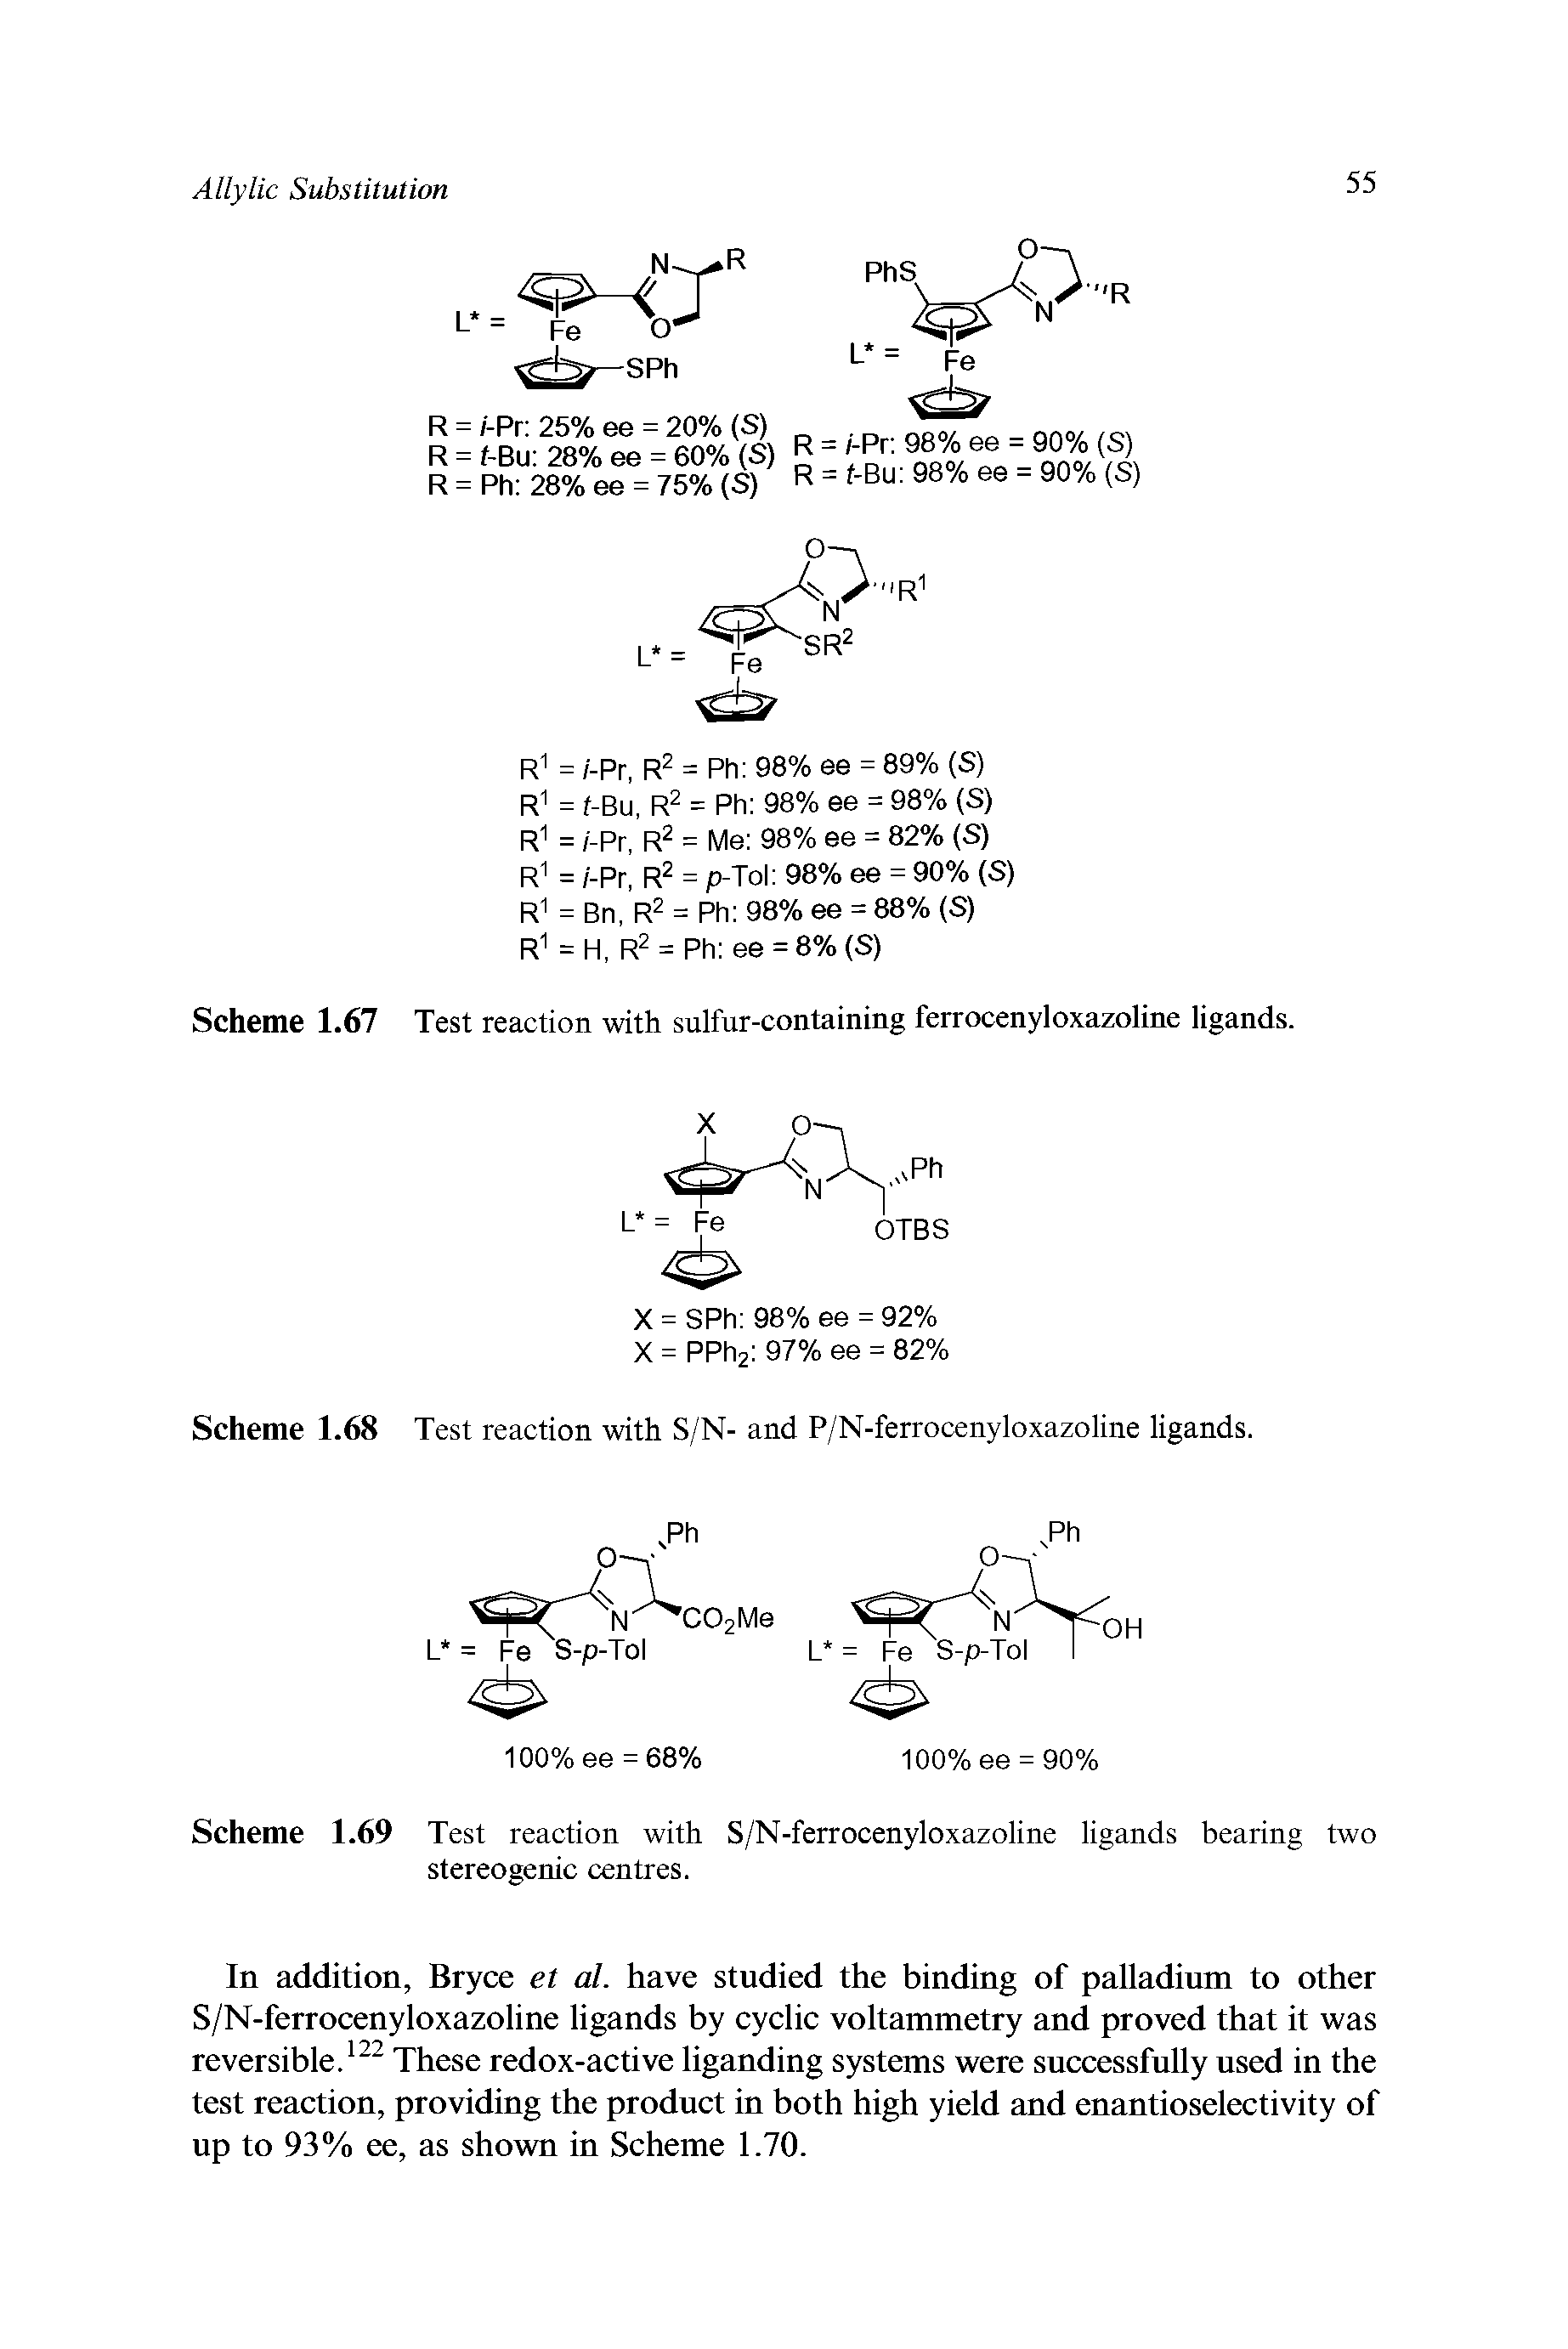 Scheme 1.67 Test reaction with sulfur-containing ferrocenyloxazoline ligands.